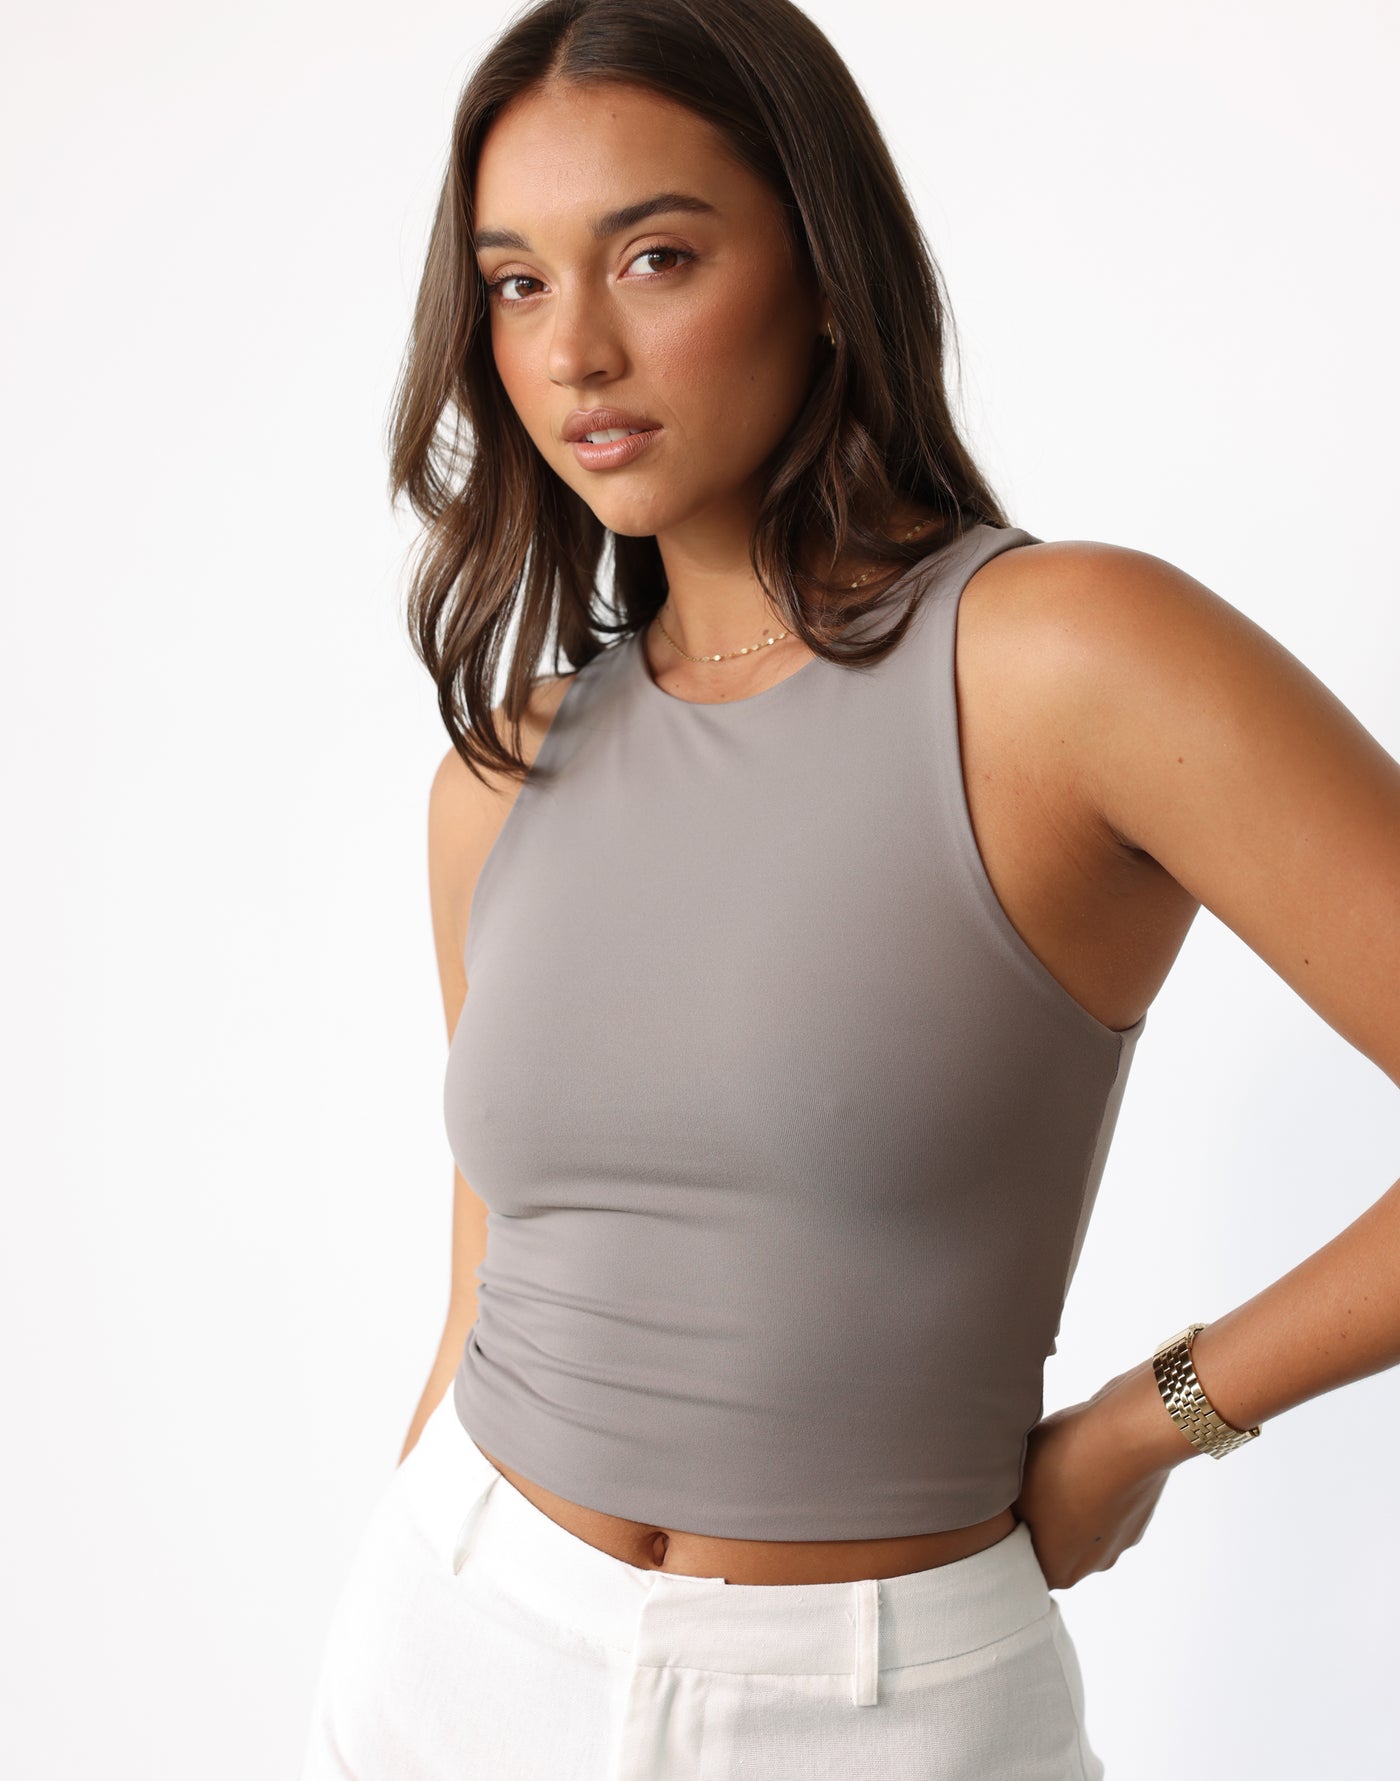 Alainn Top (Ash) - Double Lined Bodycon Butter Jersey Top - Women's Top - Charcoal Clothing